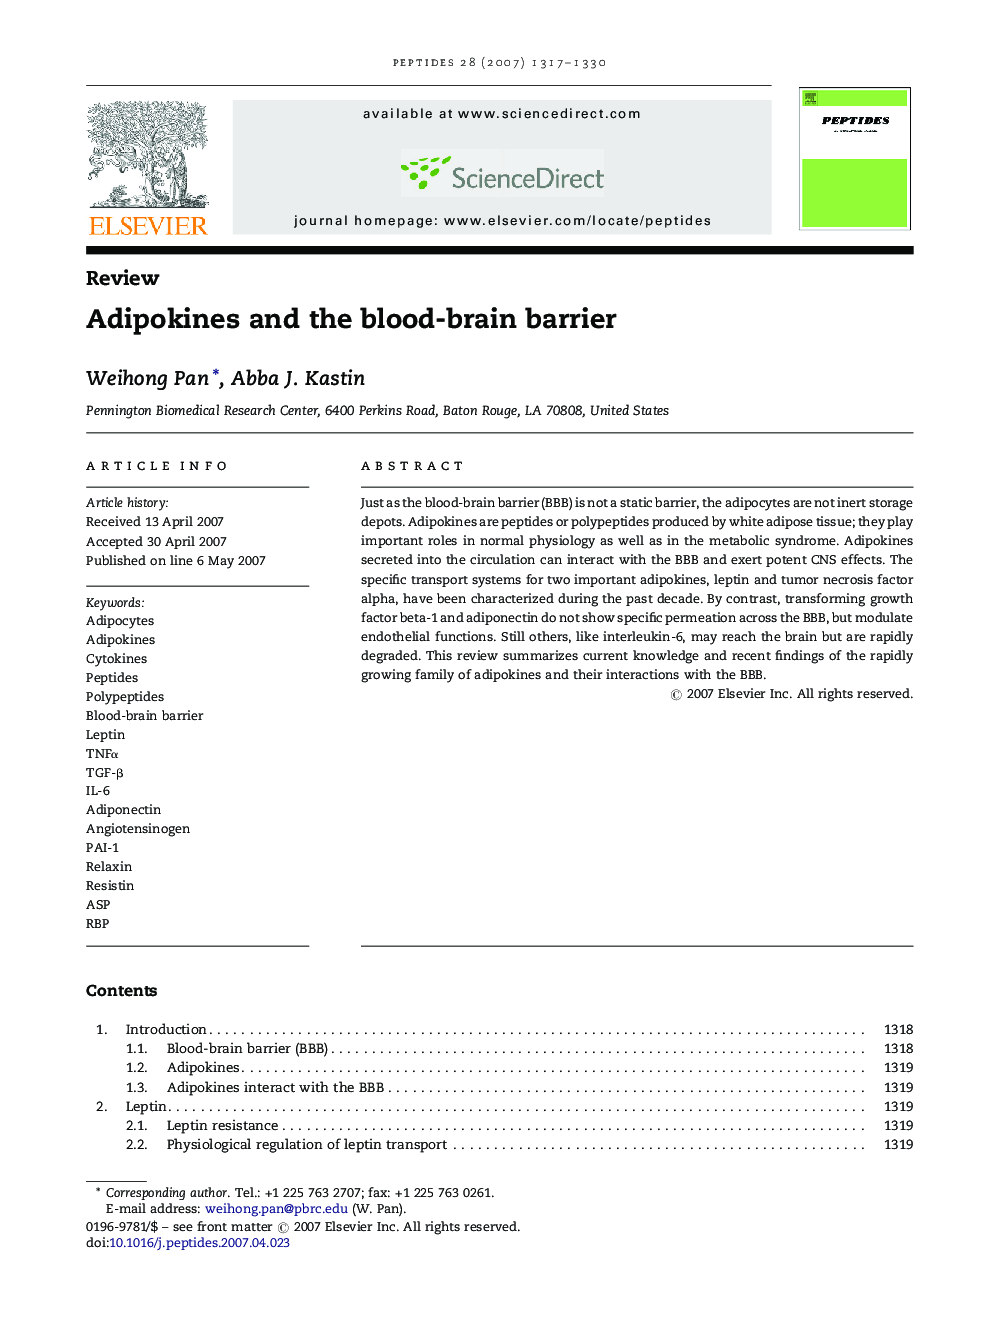 Adipokines and the blood-brain barrier